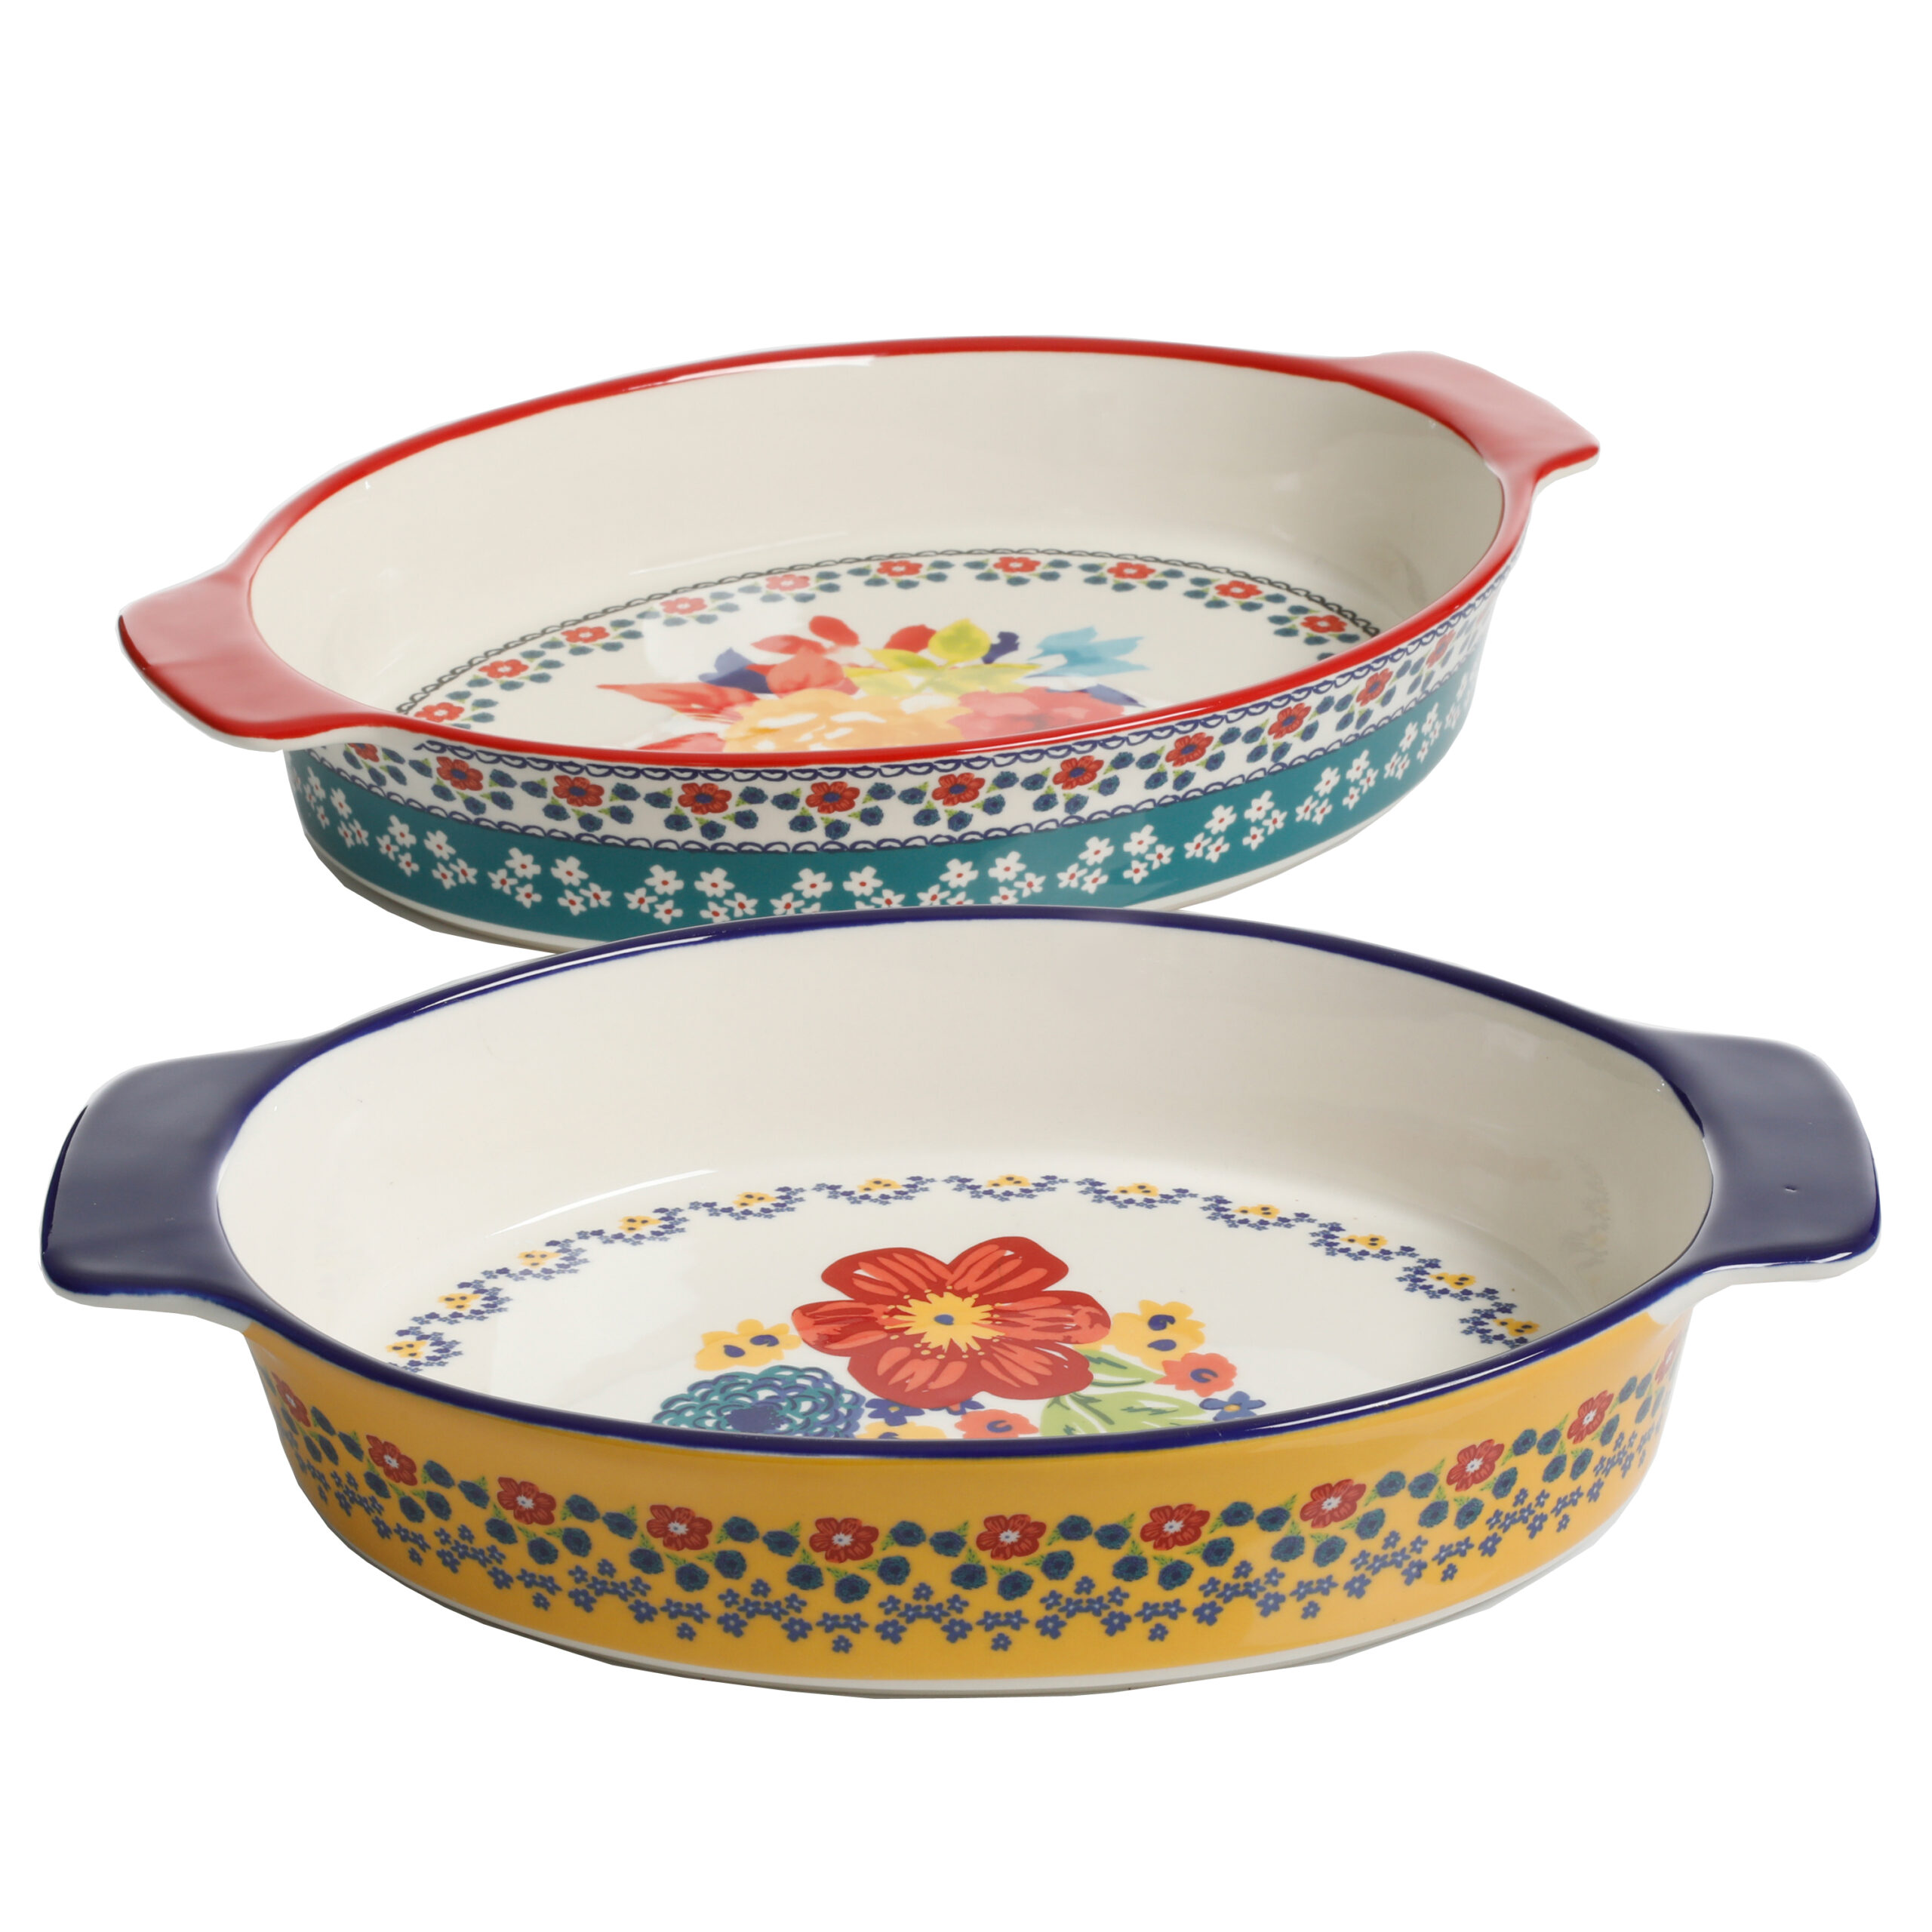 The Pioneer Woman Fiona Floral 2-Piece Ceramic Oval Bakers Set - Walmart.com